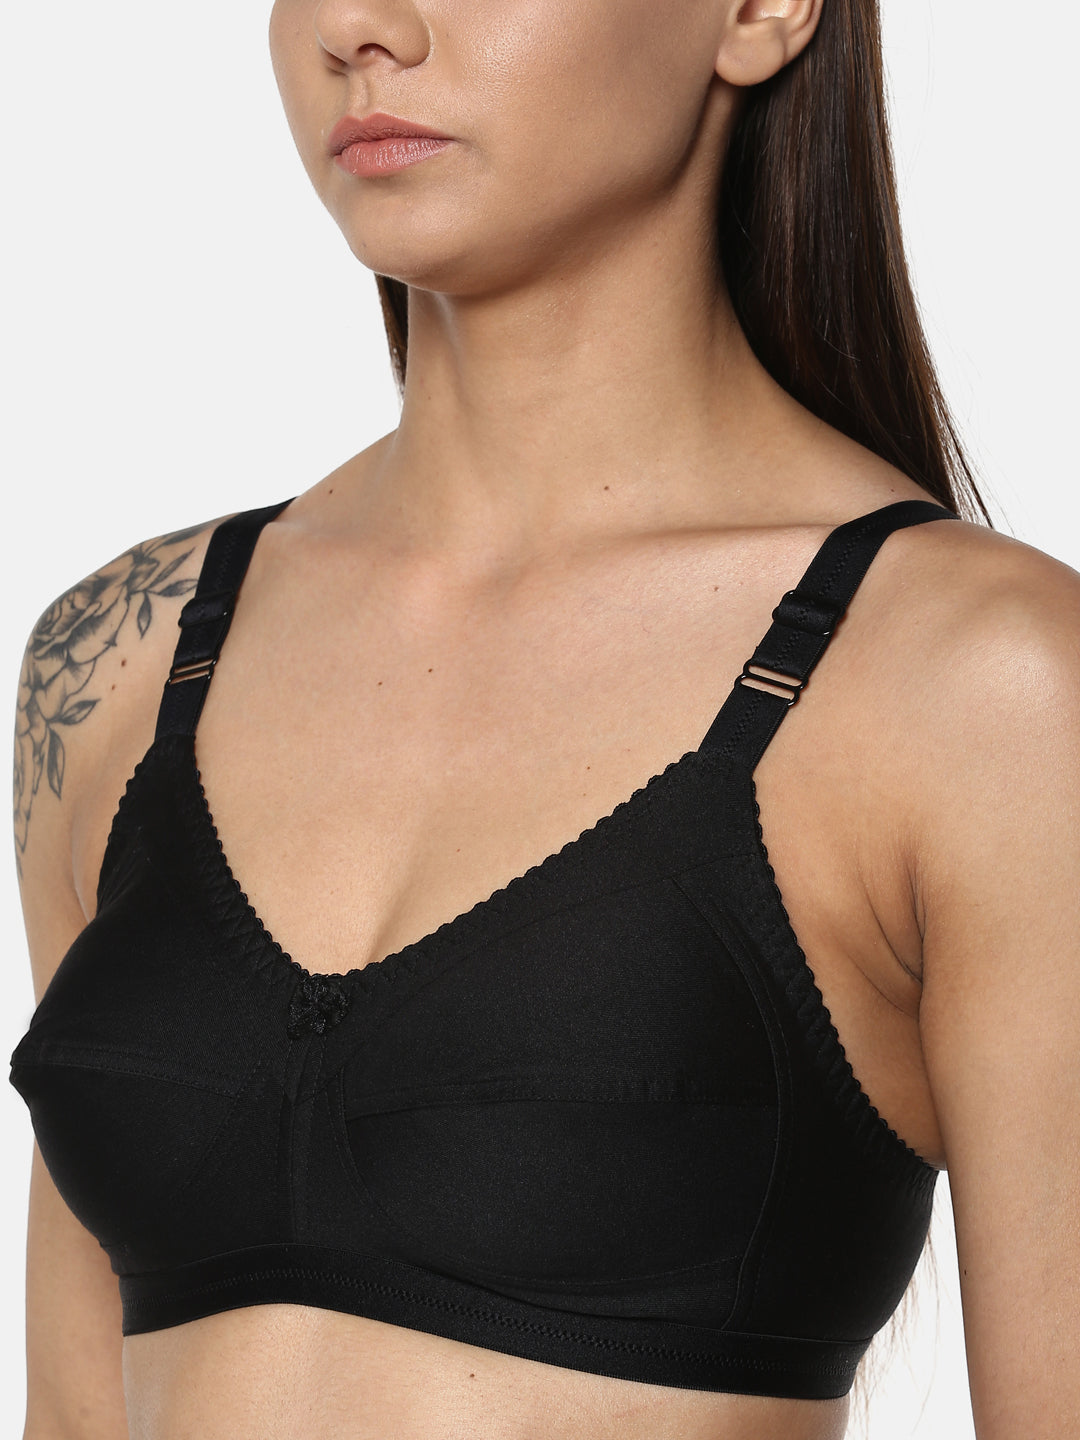 Women's Solid Black Non-Padded Cotton T-Shirt Bra | CONCENT-BLK-1 | Leading Lady